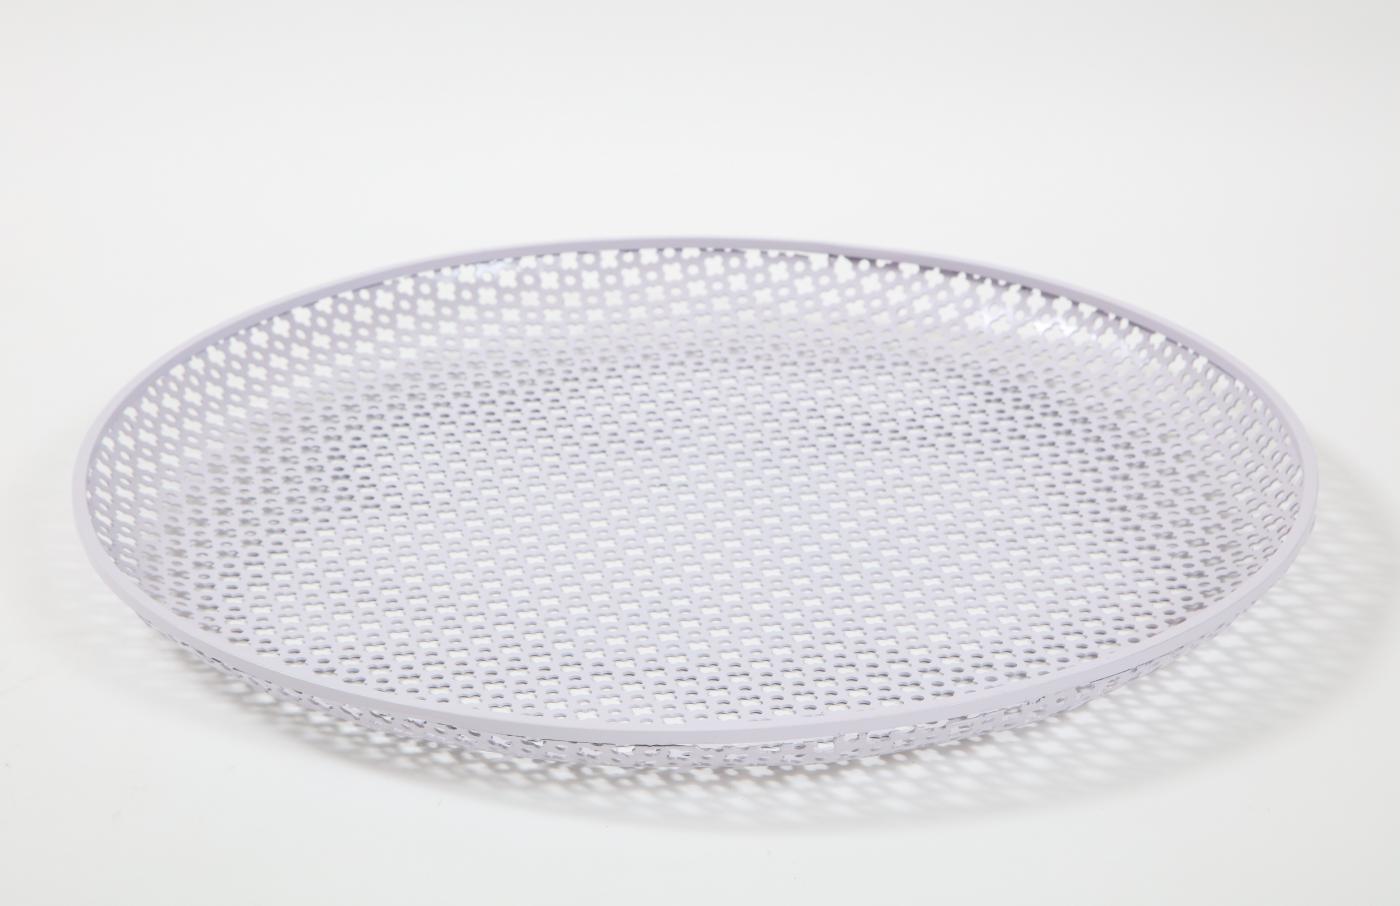 White Round Perforated Metal Tray by Mathieu Mategot, France, c. 1950 In Excellent Condition For Sale In New York City, NY